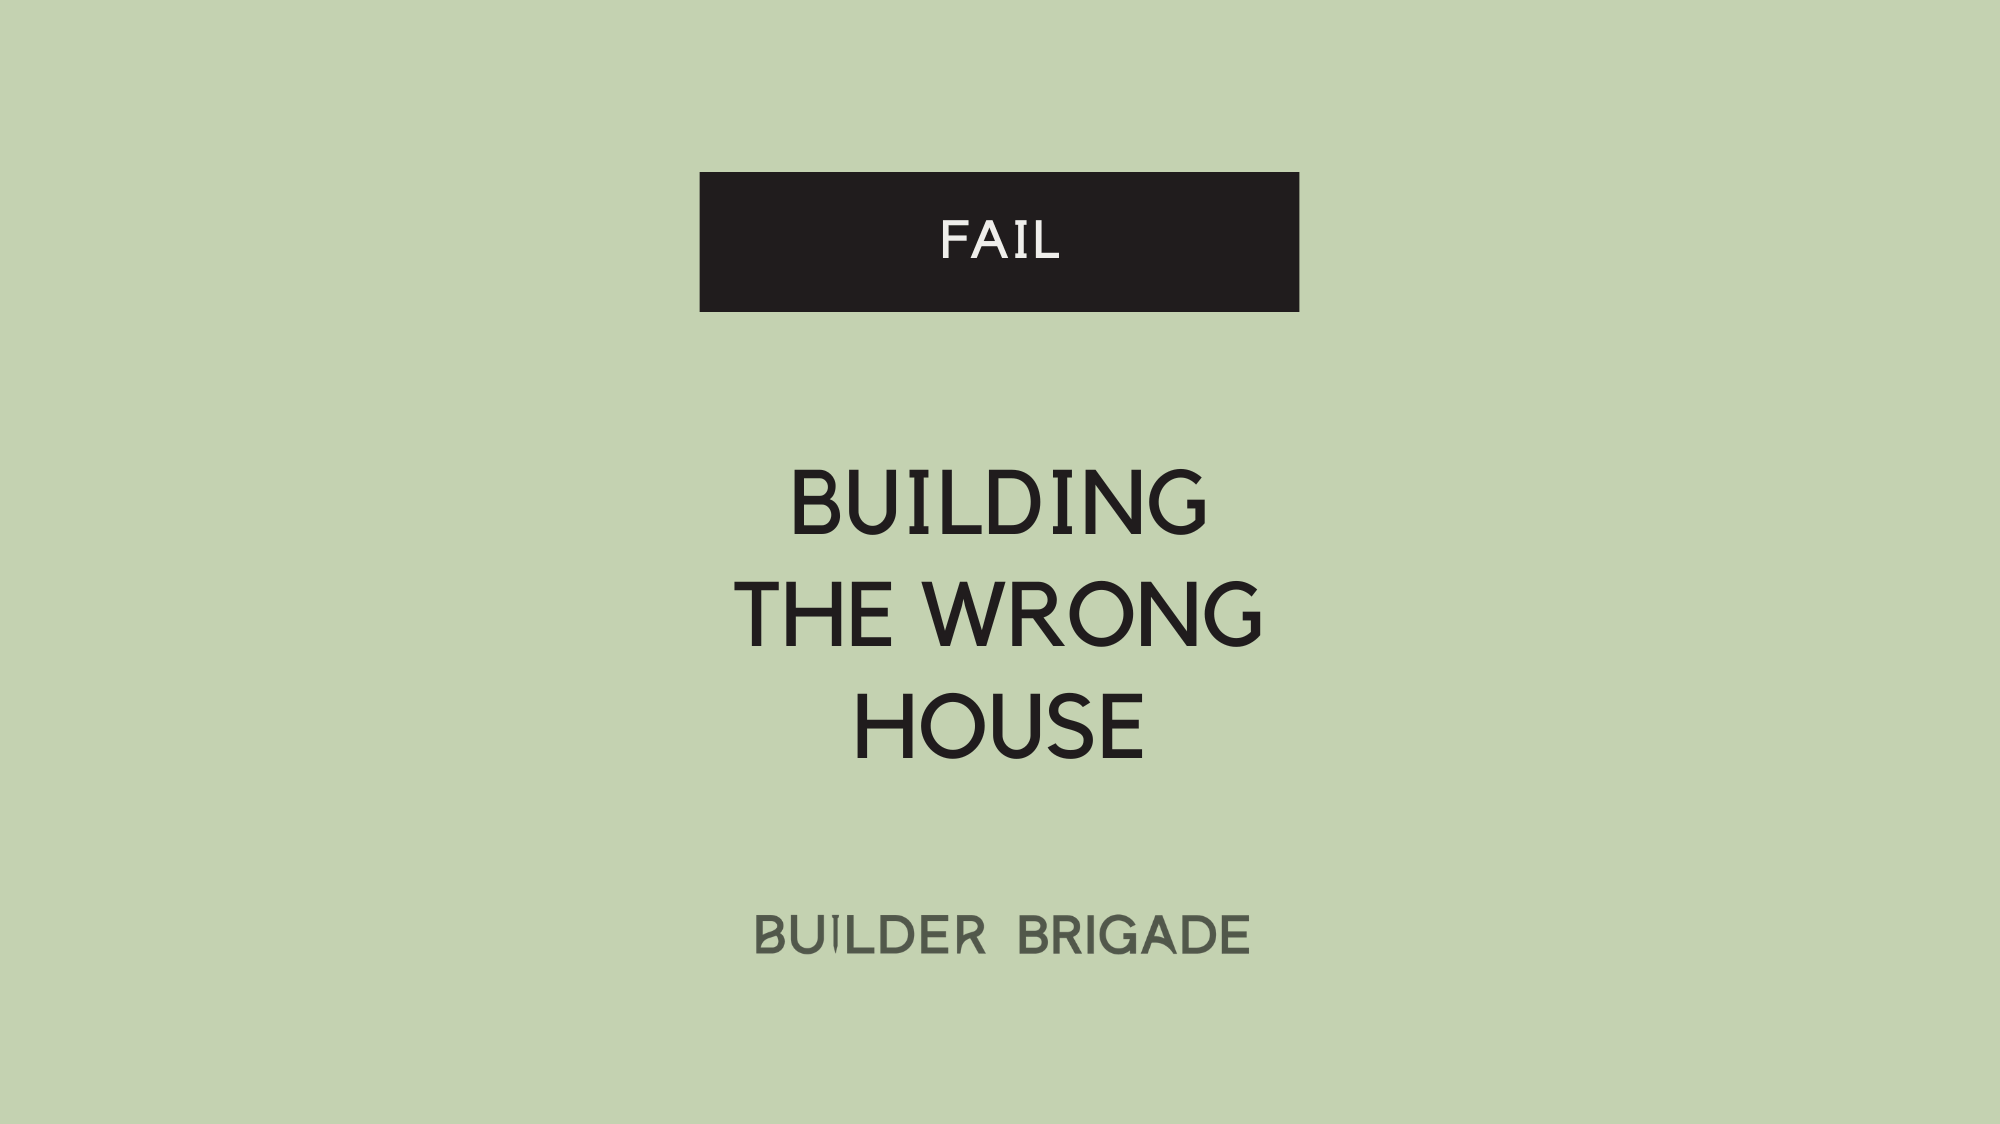 Building the wrong house